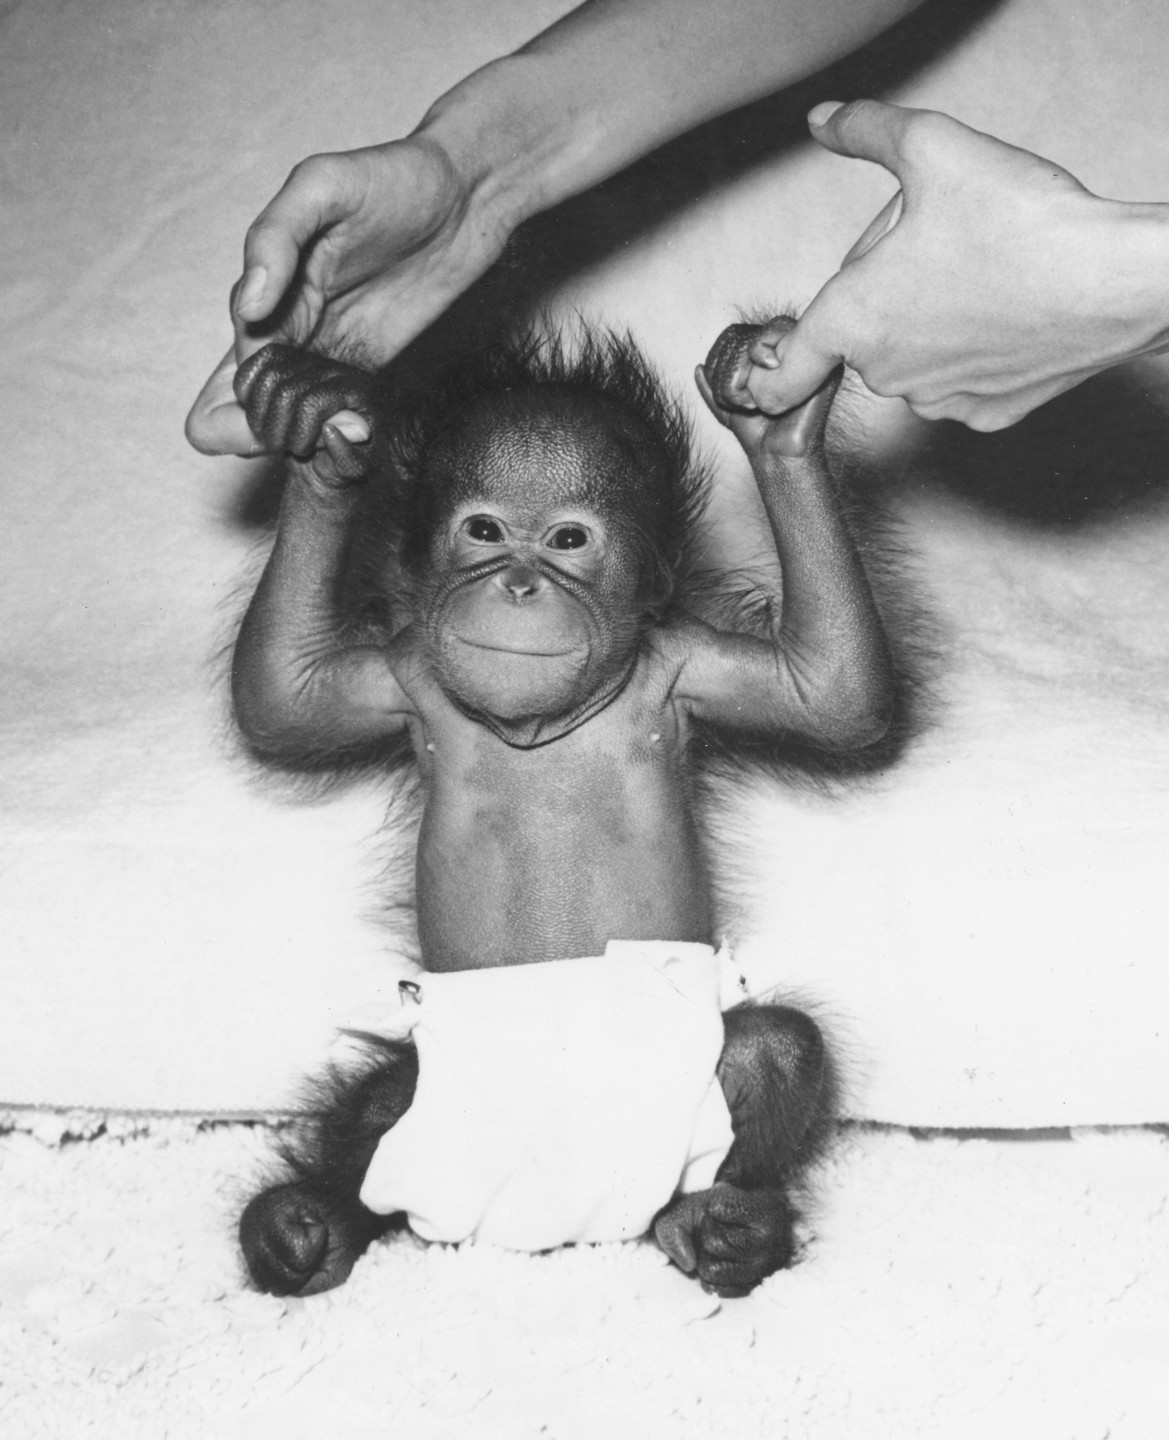 In 1955, the Zoo received a marvelous Christmas gift: a baby girl orangutan, born to mother Batavia and father Ahkup on December 25. It seemed only fitting to name her Noell. First-time mother Batavia didn't know how to take care of the little one, however, so Noell was taken to the Zoo's nursery to be hand raised. She actually had another home away from home, as well: when the nursery caregiver came down with the flu, Noell spent some time at the home of Zoo director Dr. Charlie Schroeder, under the watchful care of Charlie's wife, Margaret. Like her tiny house guest, Margaret also had red hair, and Charlie had a favorite story to tell about their primate babysitting days. One day when Noell was at the house, the mailman, who was friendly with the Schroeders, came by with their mail and stopped to chat. He glanced at the crib in the room, and his eyes widened when he saw Noell. He turned to Charlie, and said rather dryly, 